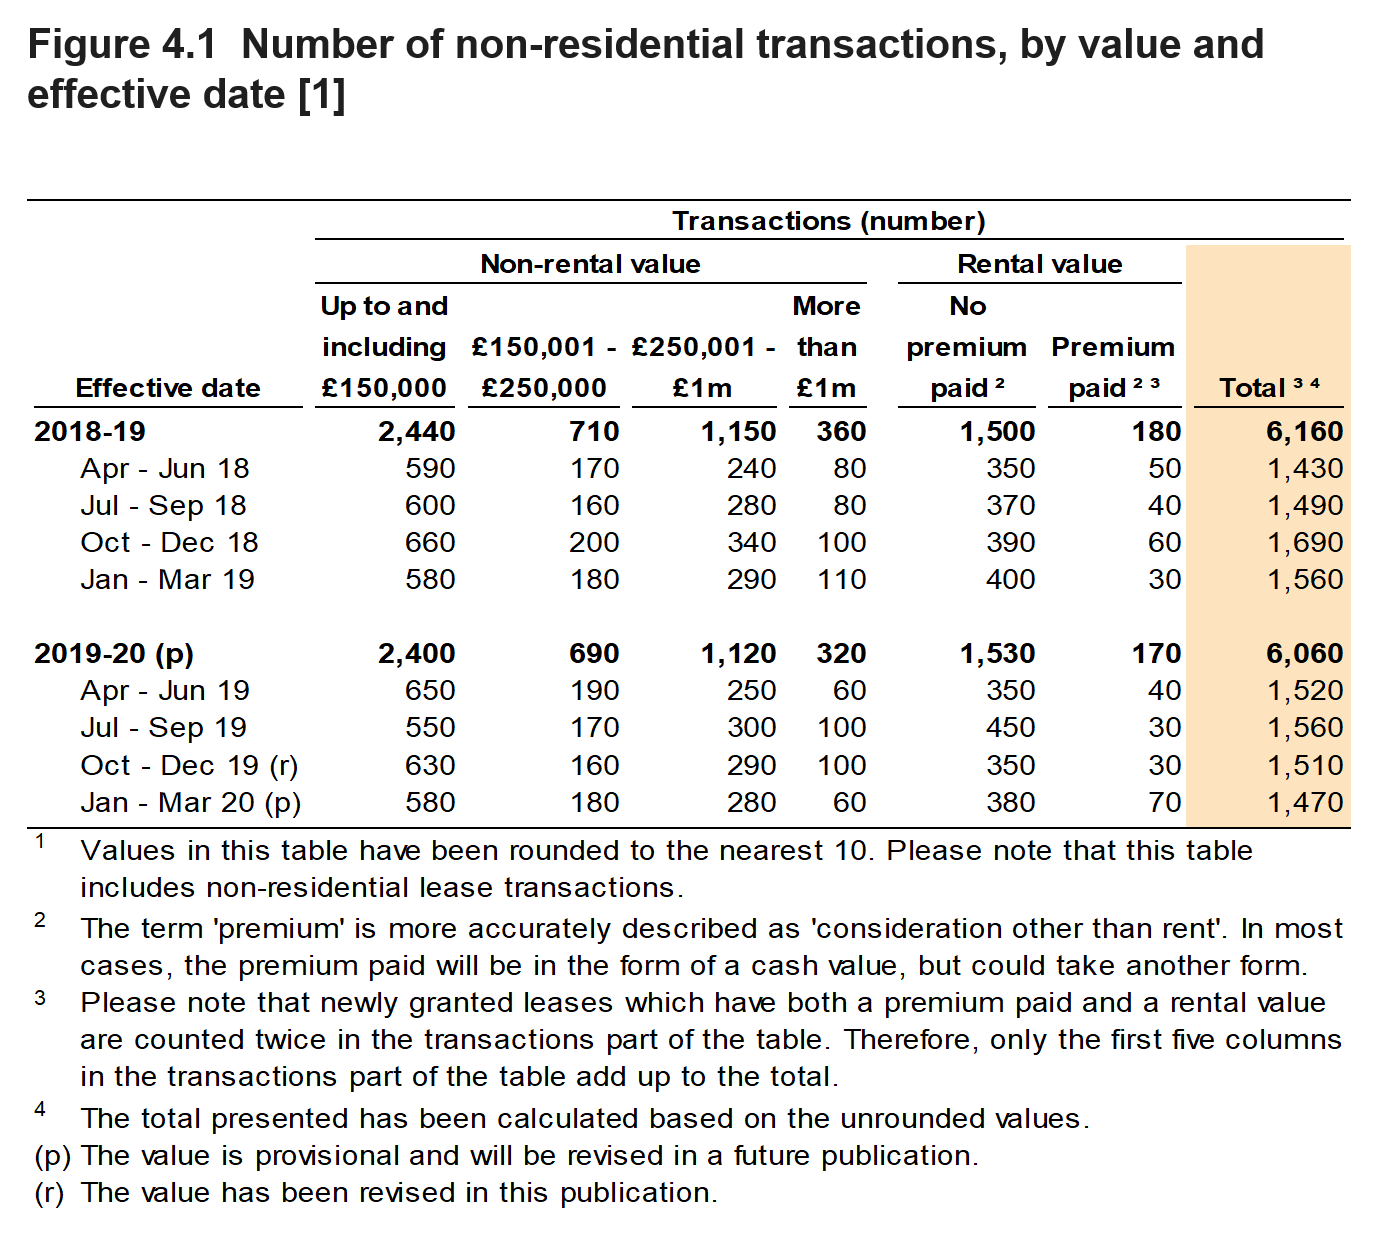 Figure 4.1 shows the number of non-residential transactions by value of the property. Data is shown for the year and quarter in which the transaction was effective.